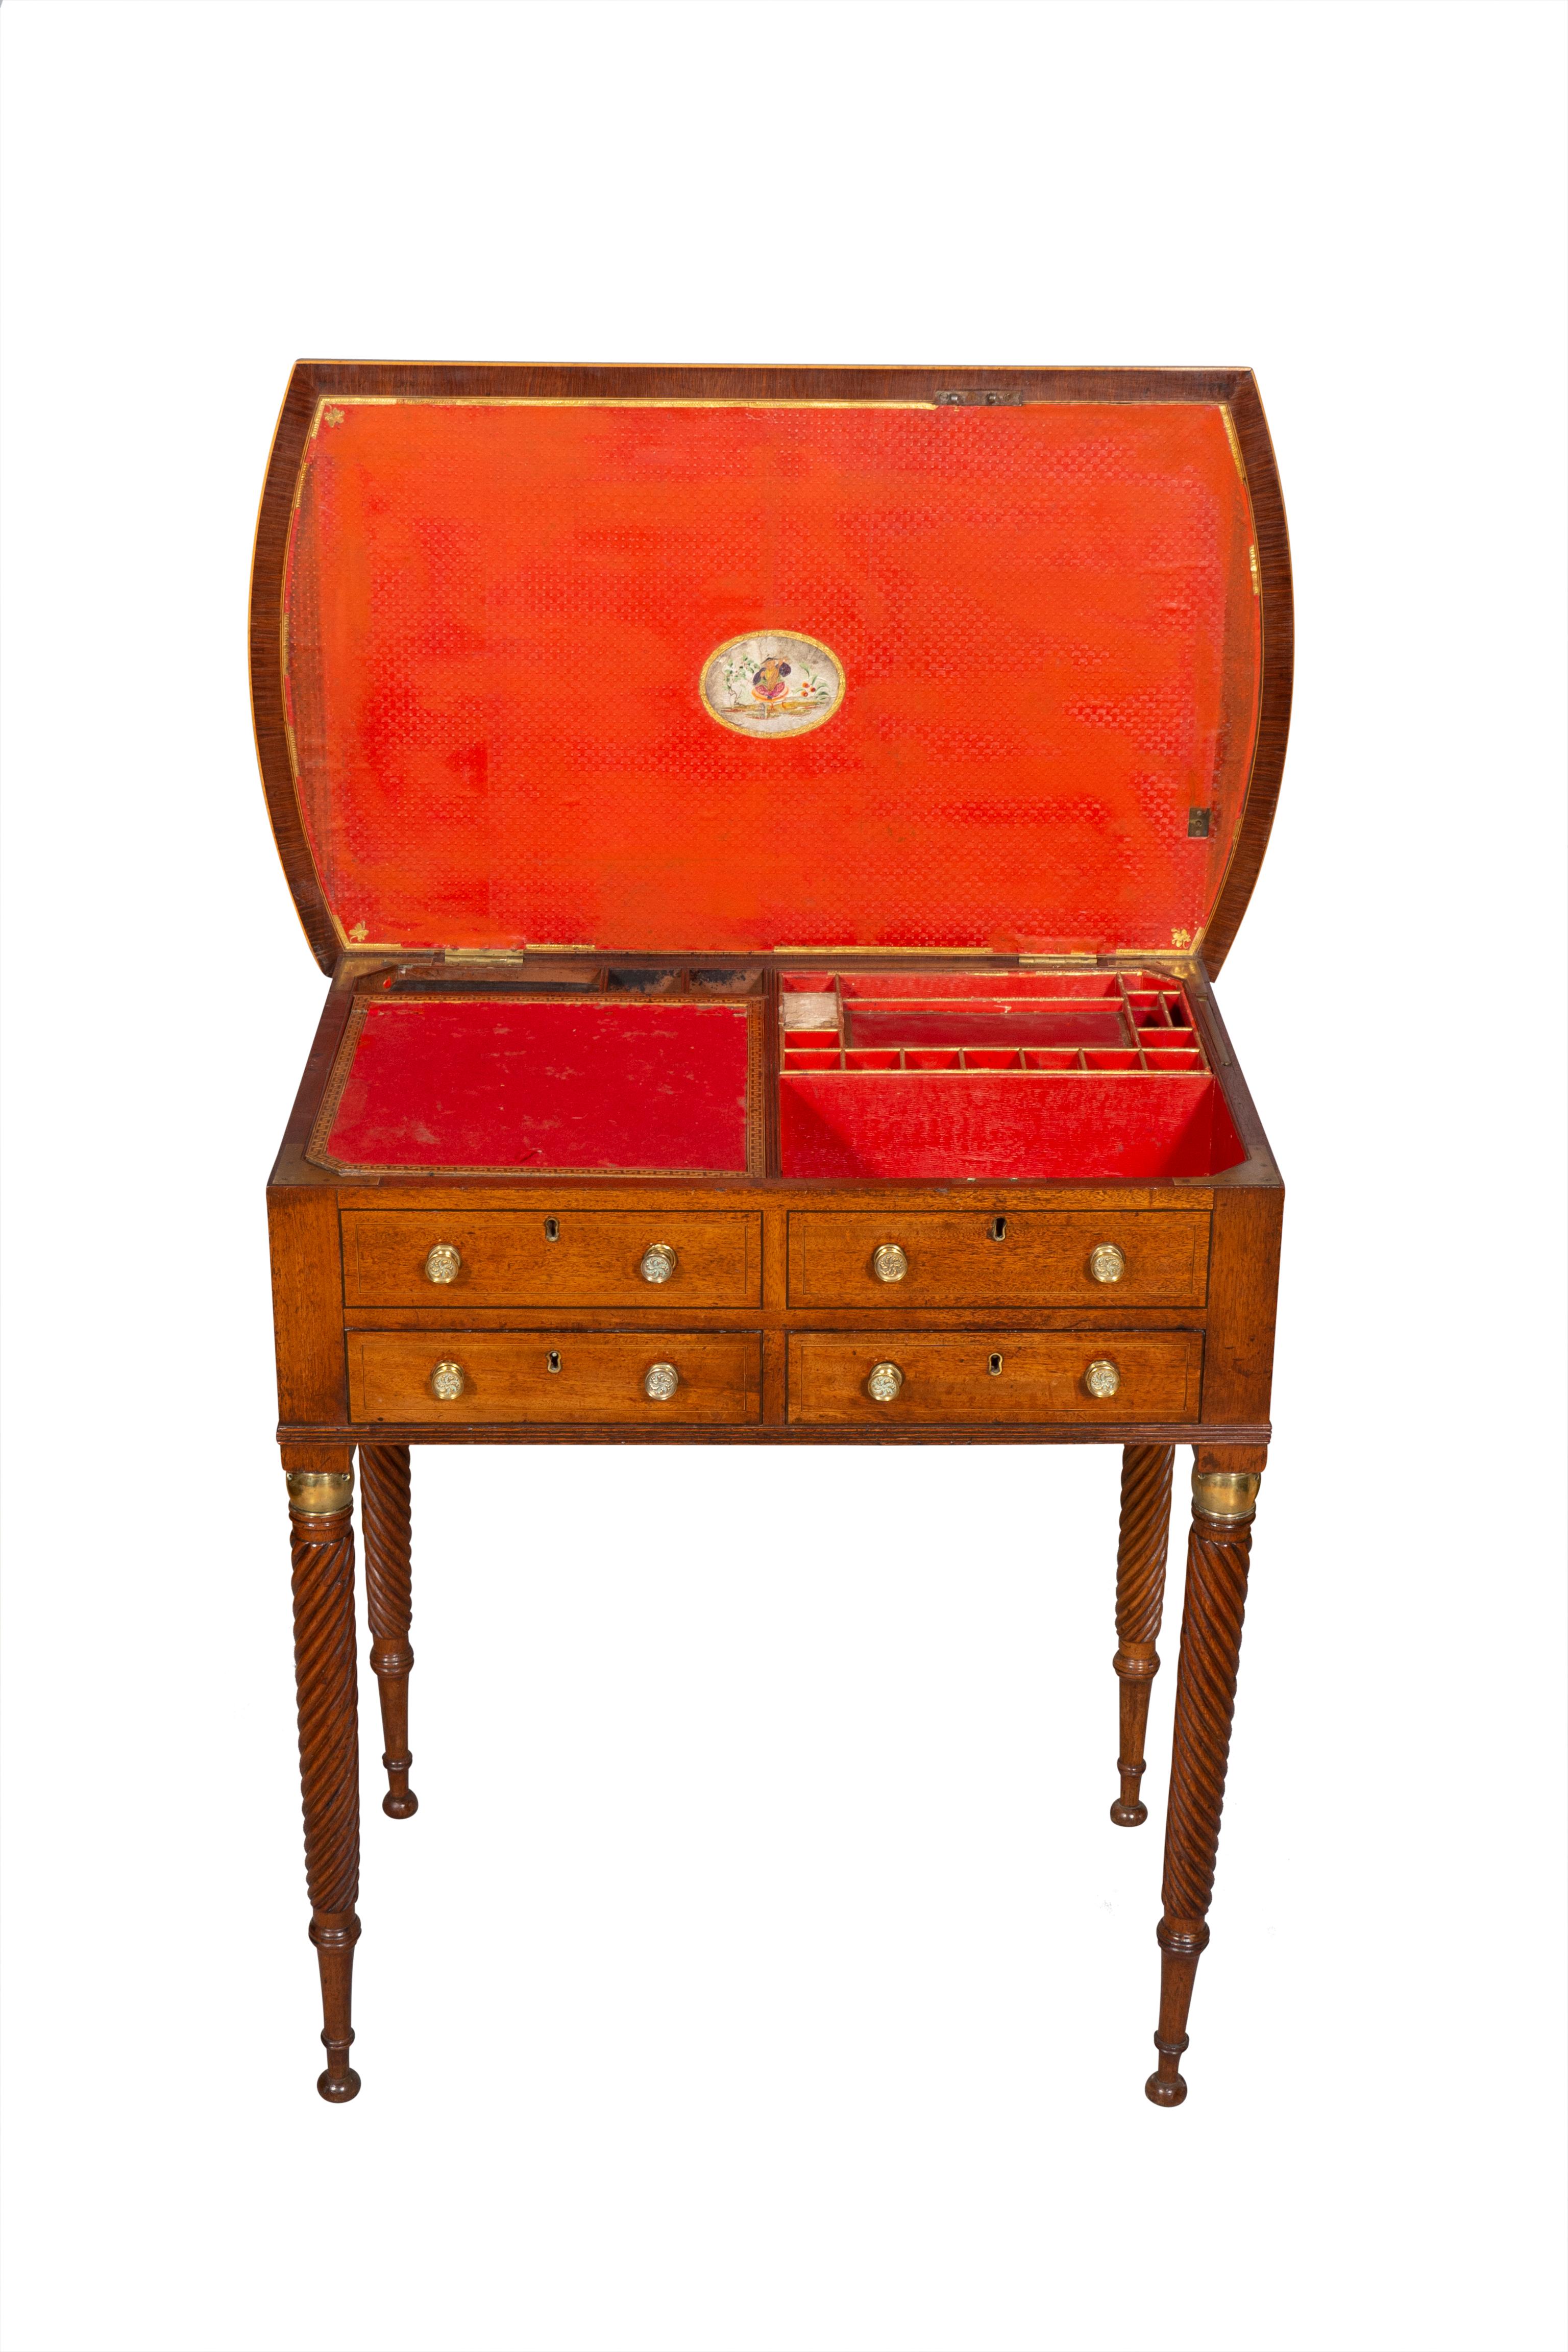 Early 19th Century Unusual Regency Mahogany Campaign Desk For Sale